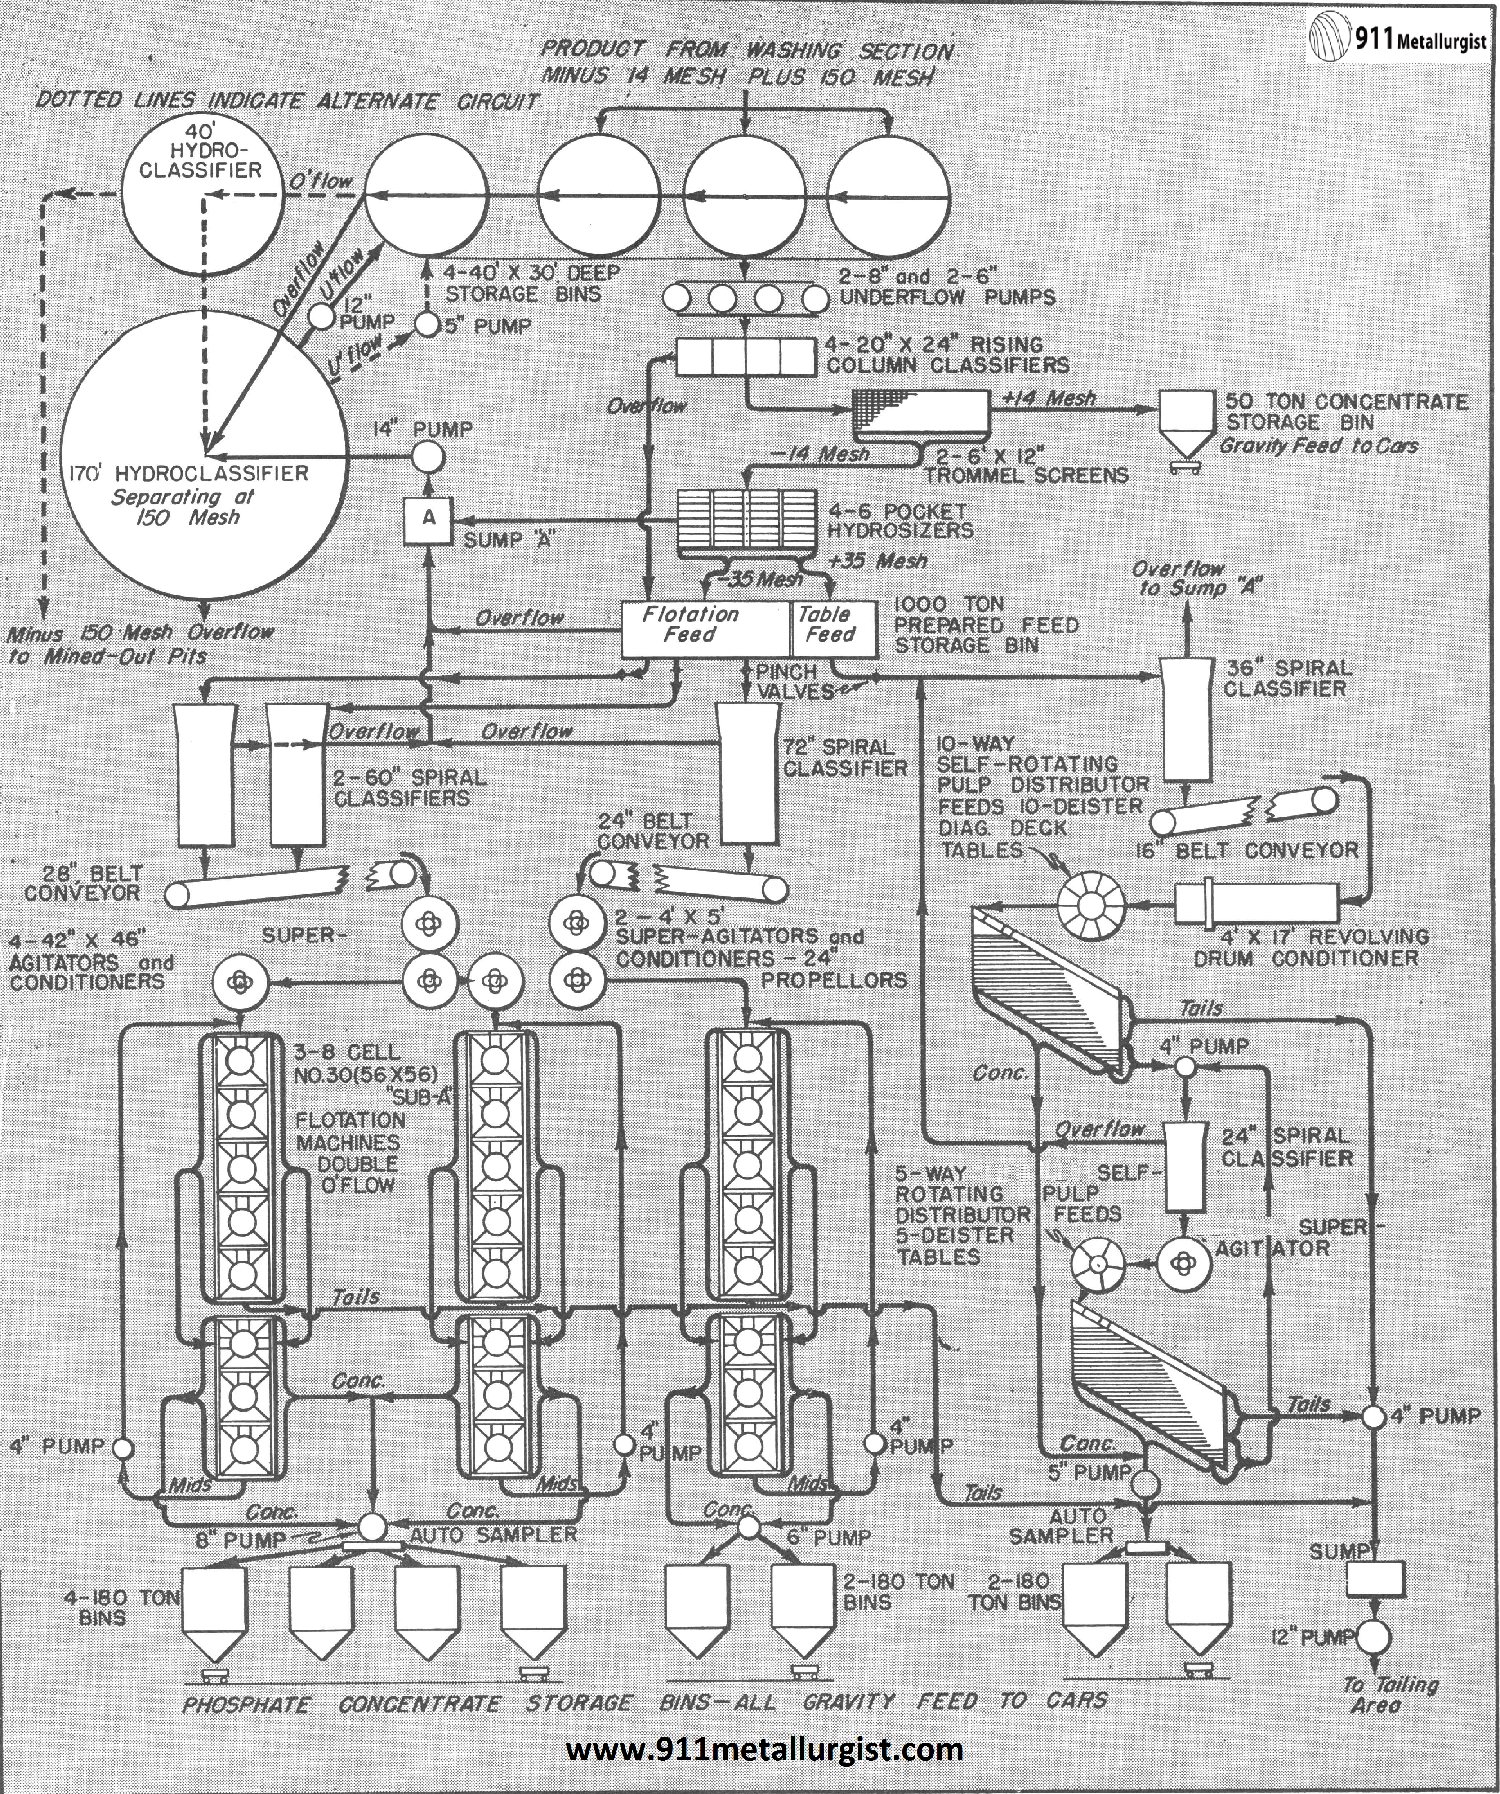 Flow-Sheet of a Florida Phosphate Plant Recovering